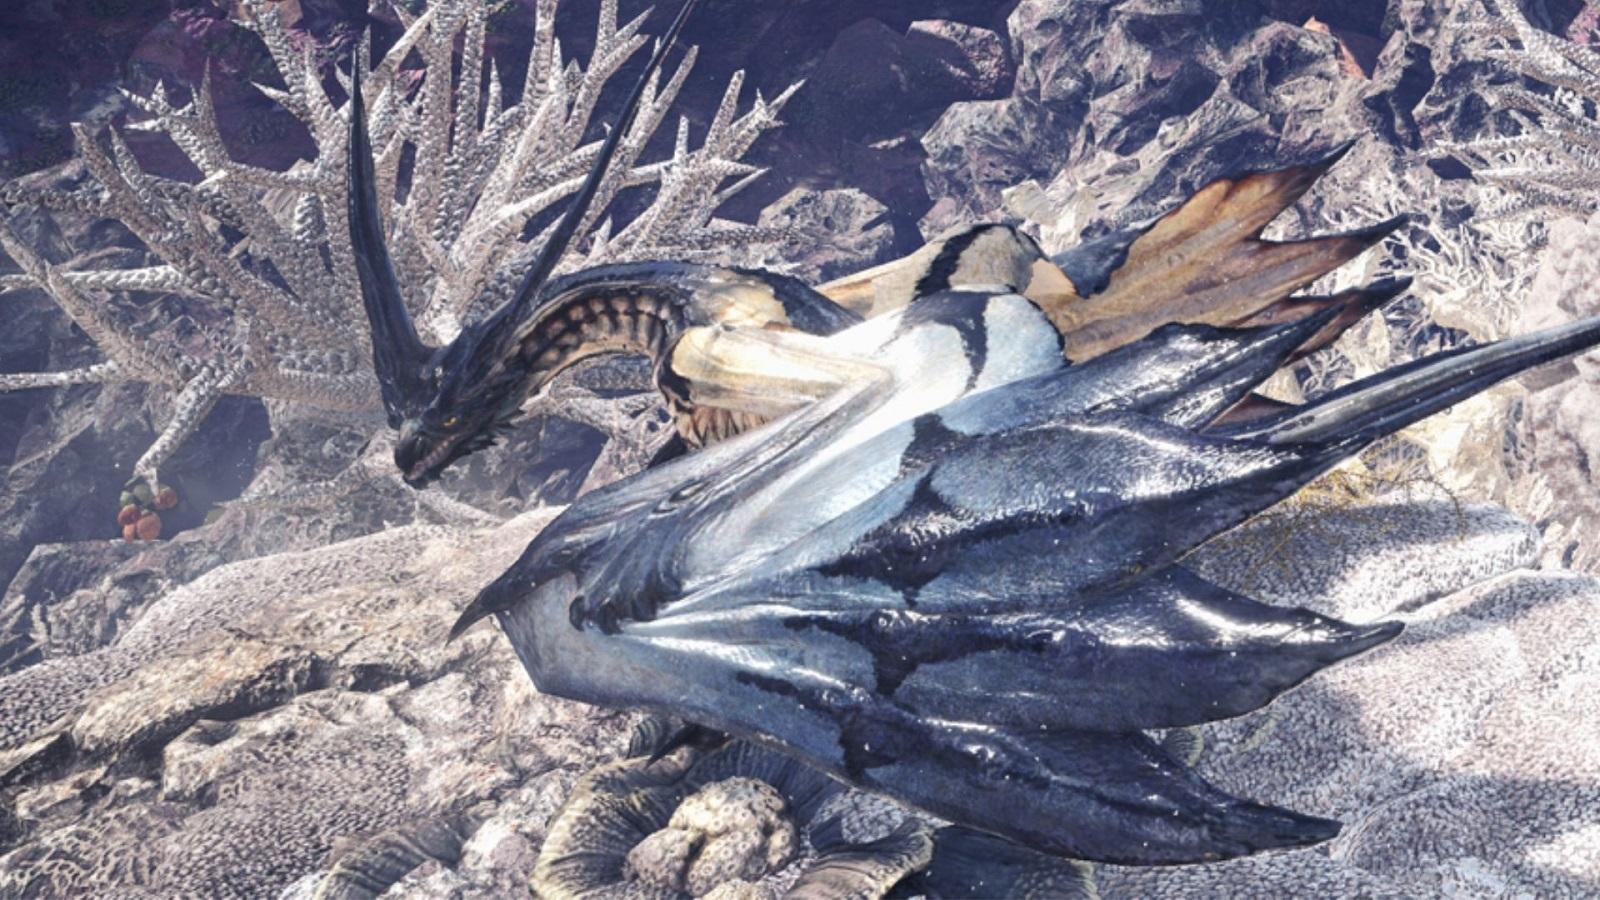 Legiana in the Coral Highlands